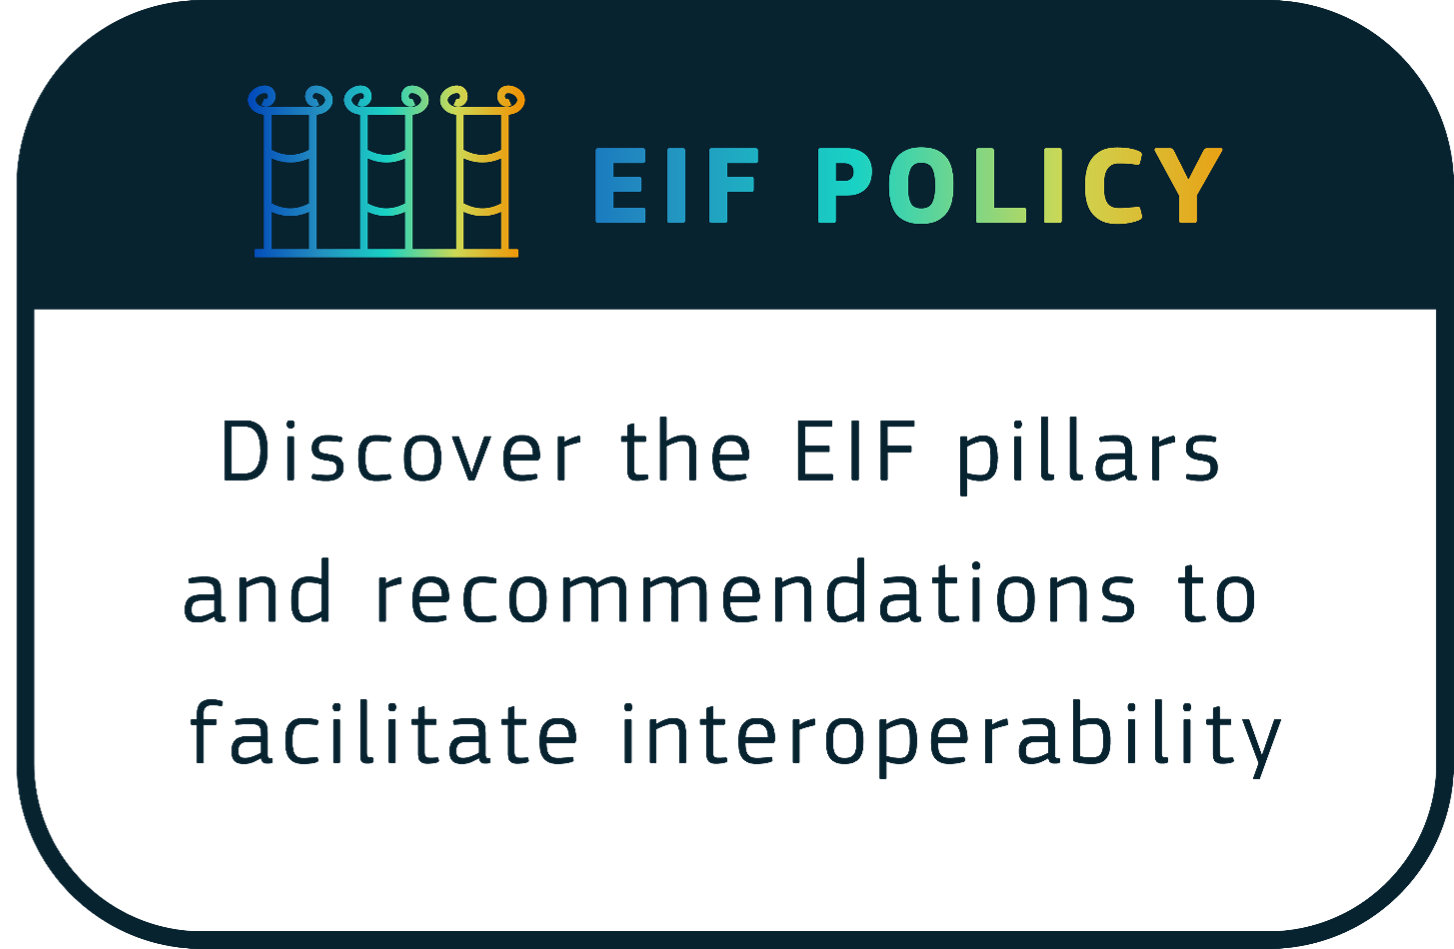 EIF policy: Discover the EIF pillars and recommendations to facilitate interoperability